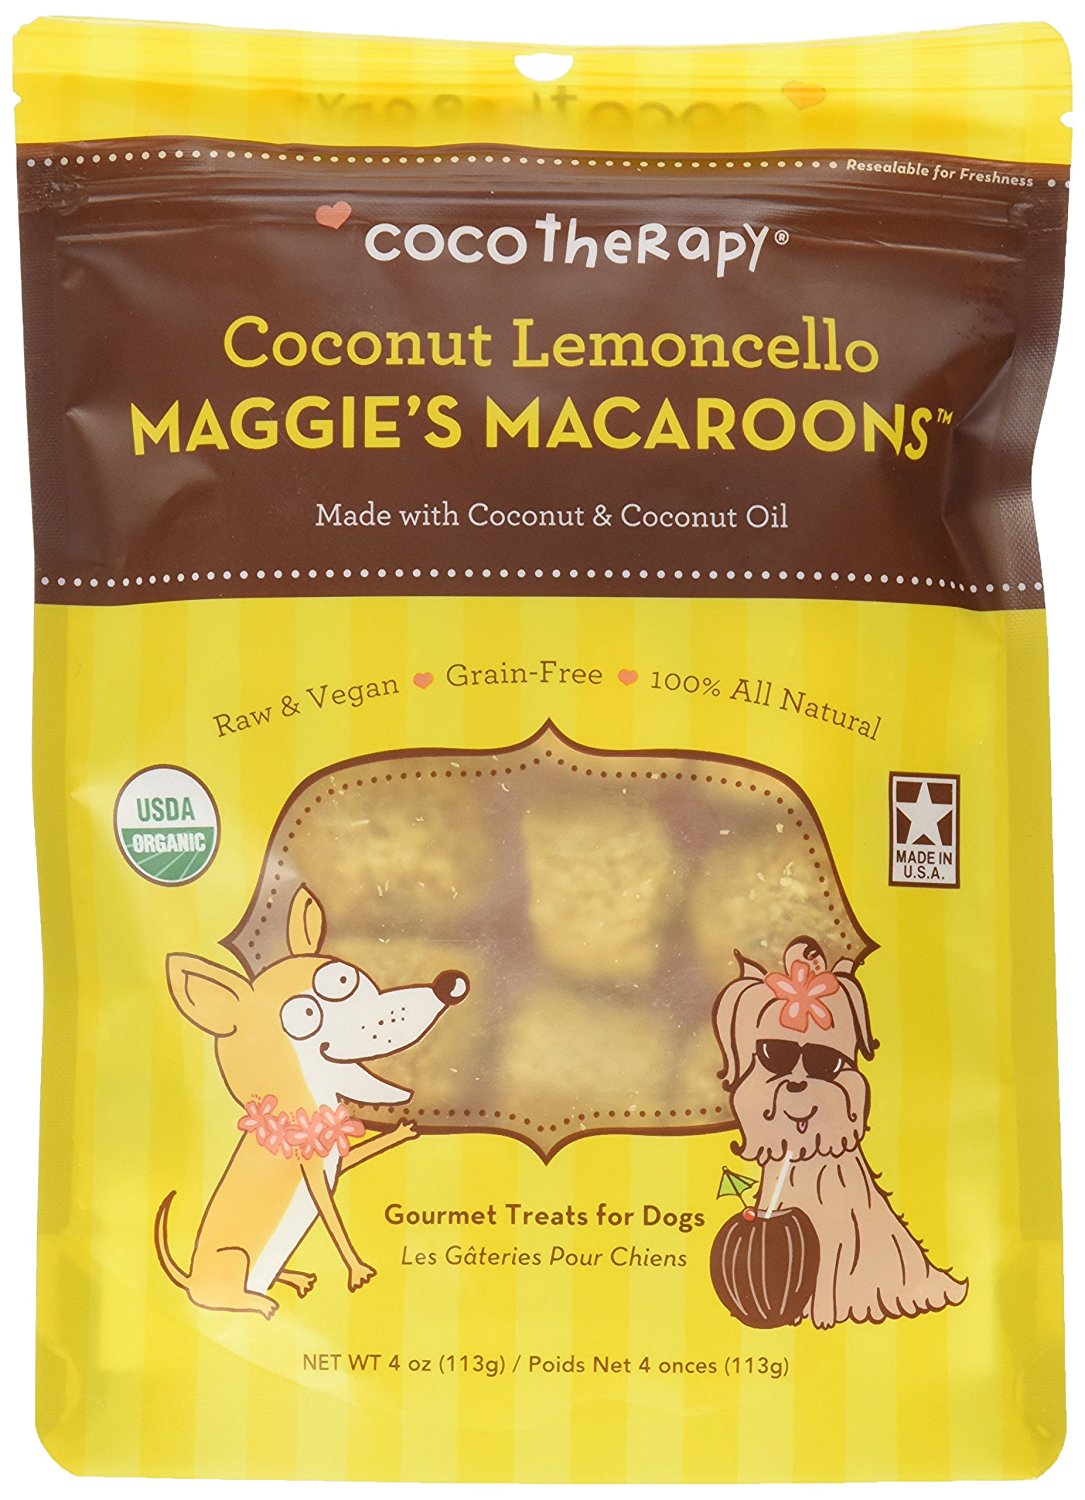 Cocotherapy Maggie's Macaroons Coconut Lemoncello (1 Pouch), 4 Oz